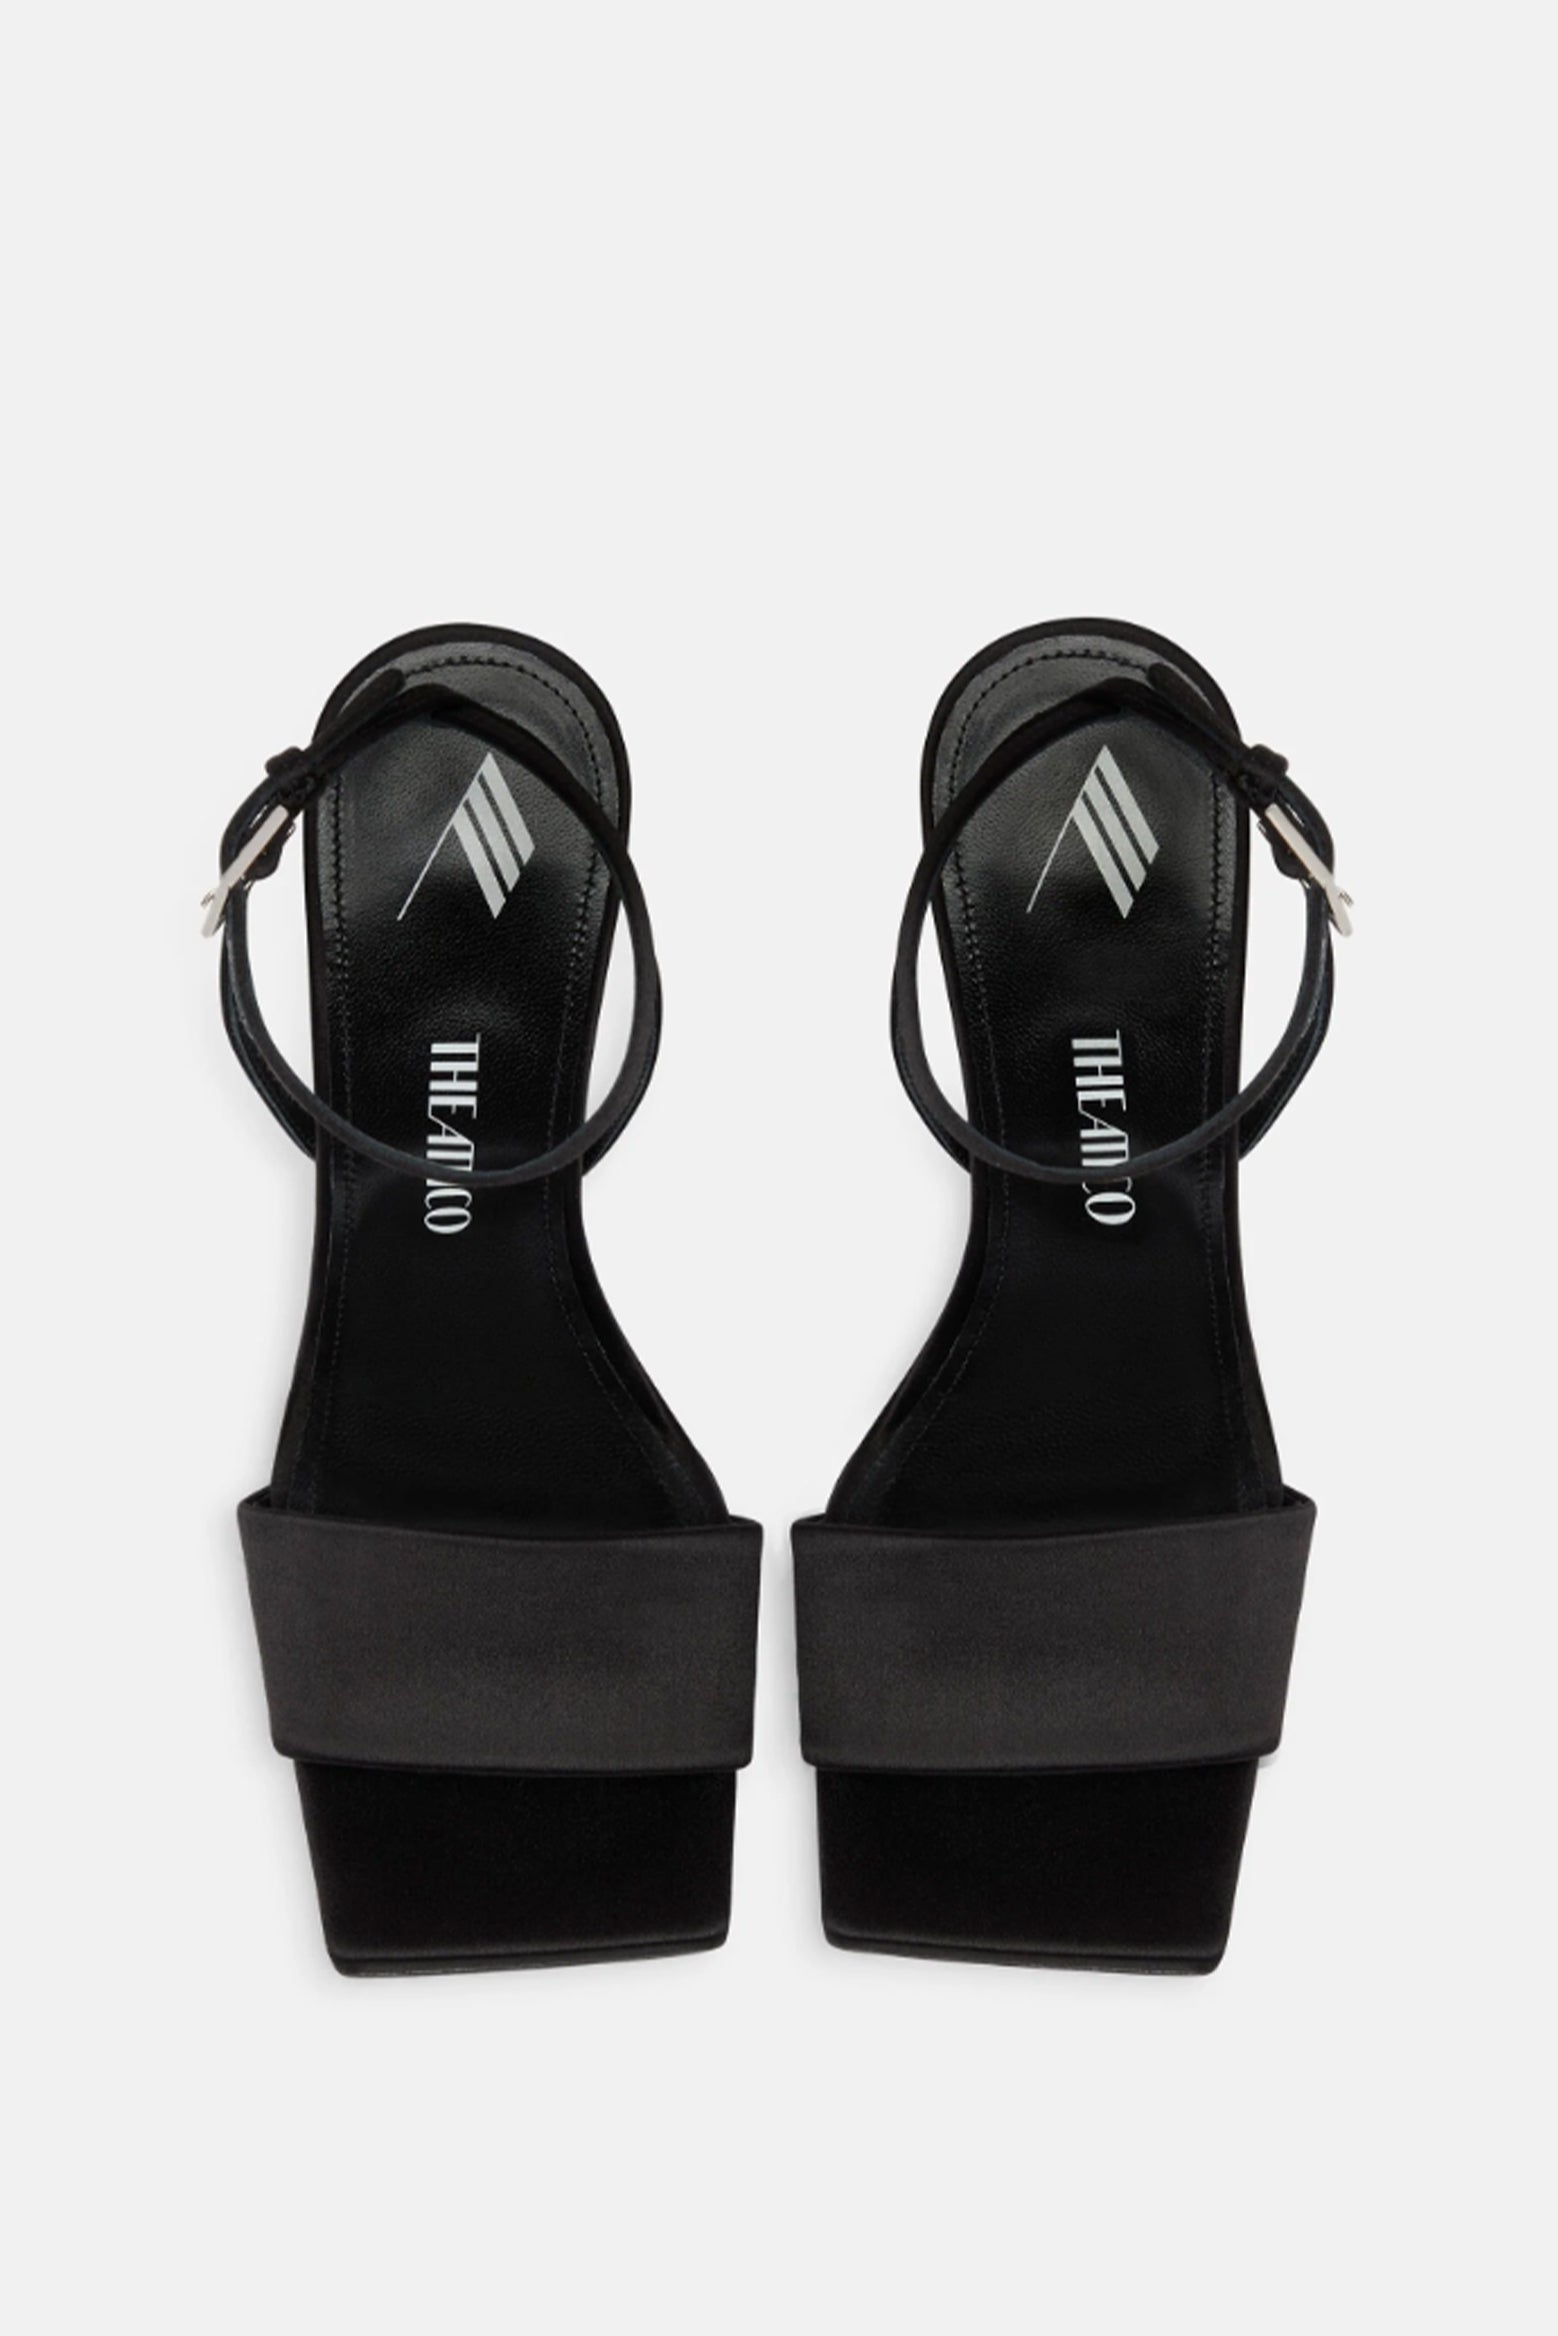 The Attico Cheope Sandal in Black available at The New Trend Australia